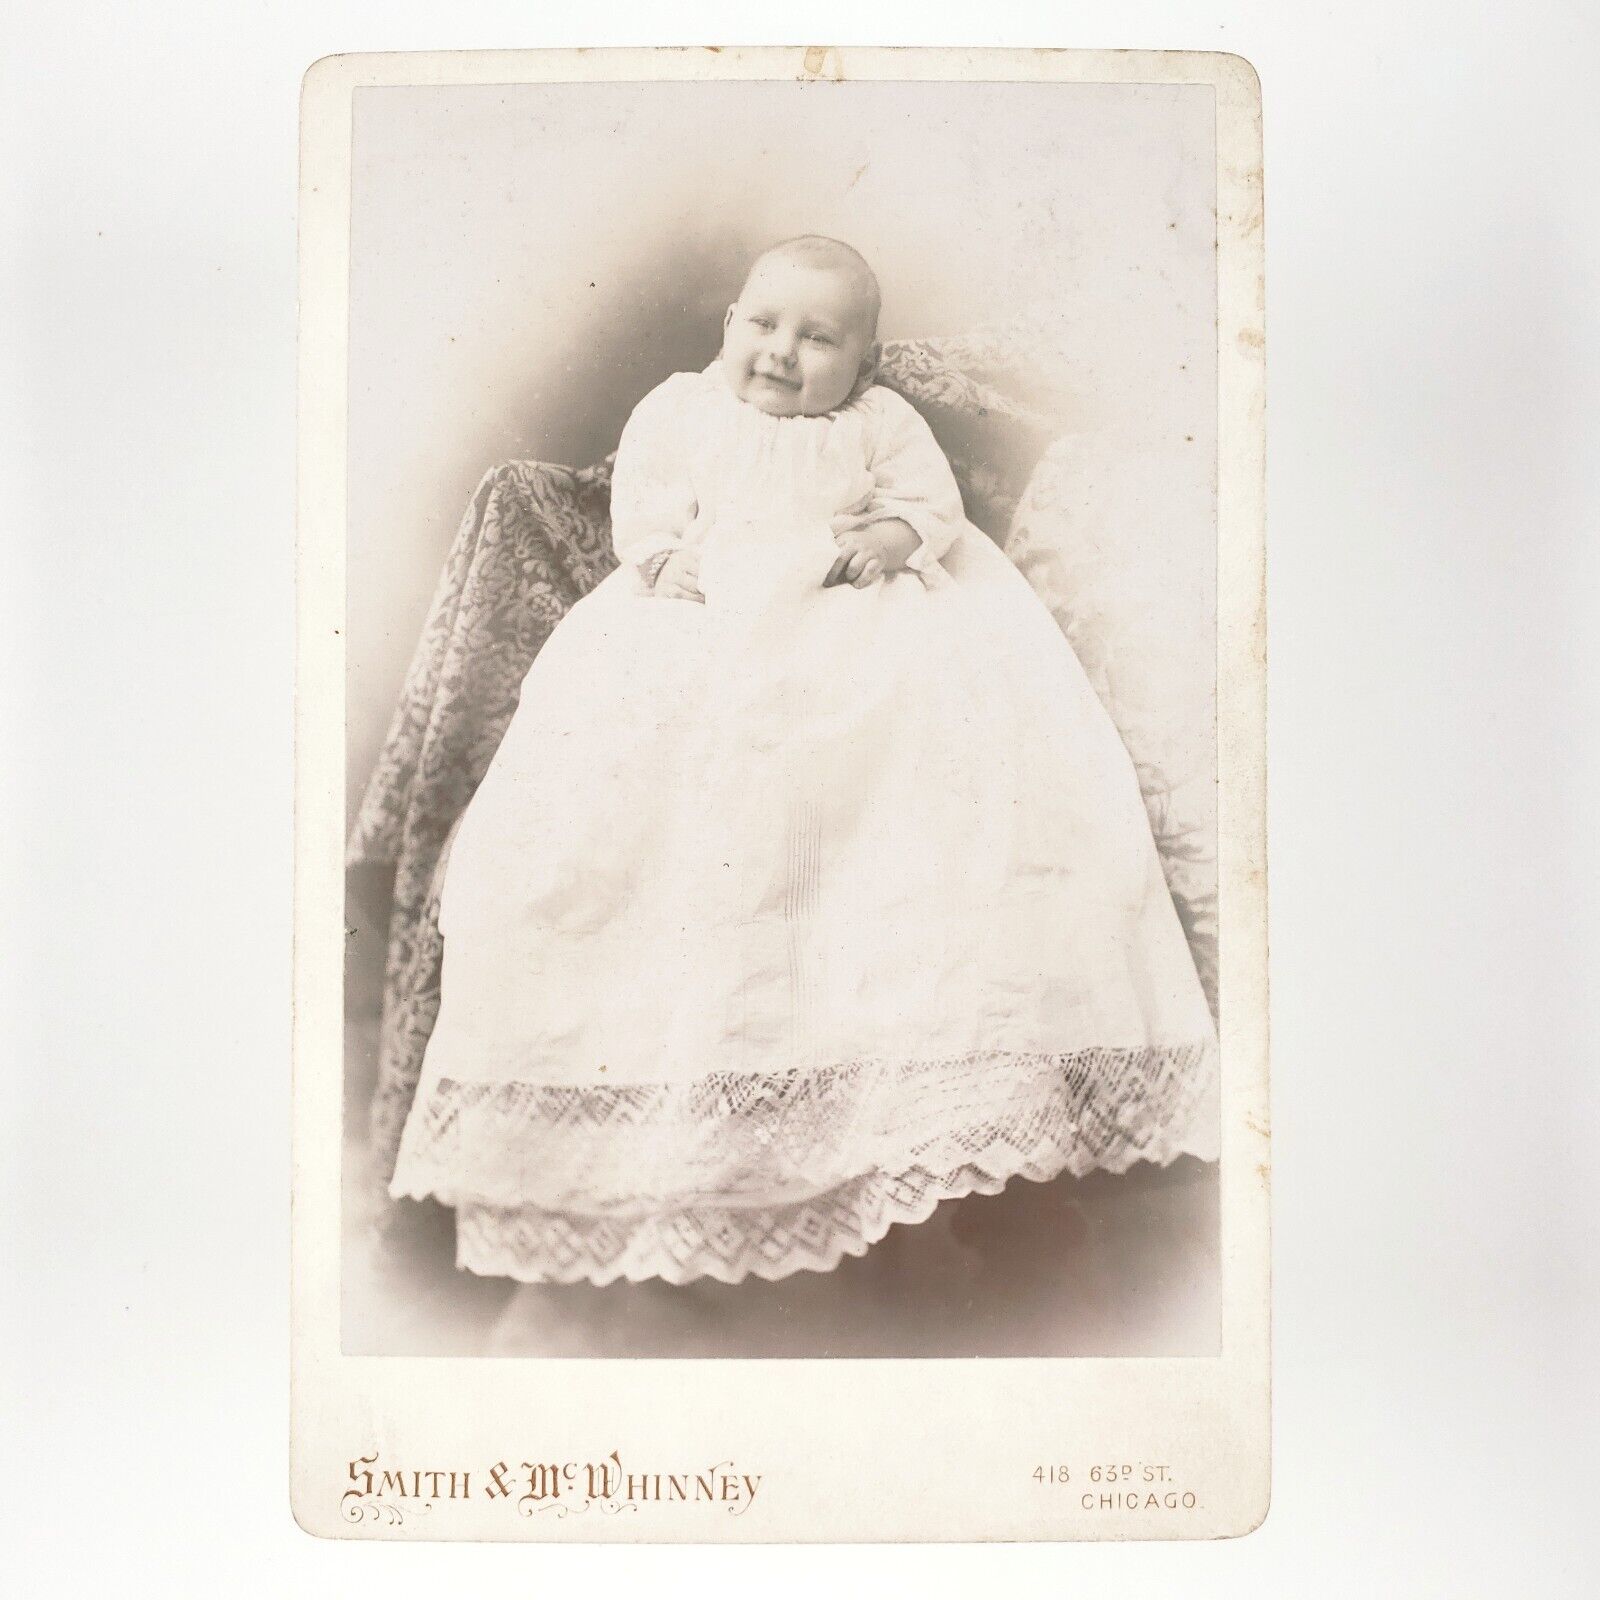 Happy Named Baby Cabinet Card c1875 Child Smiling Chicago Illinois Photo A3901